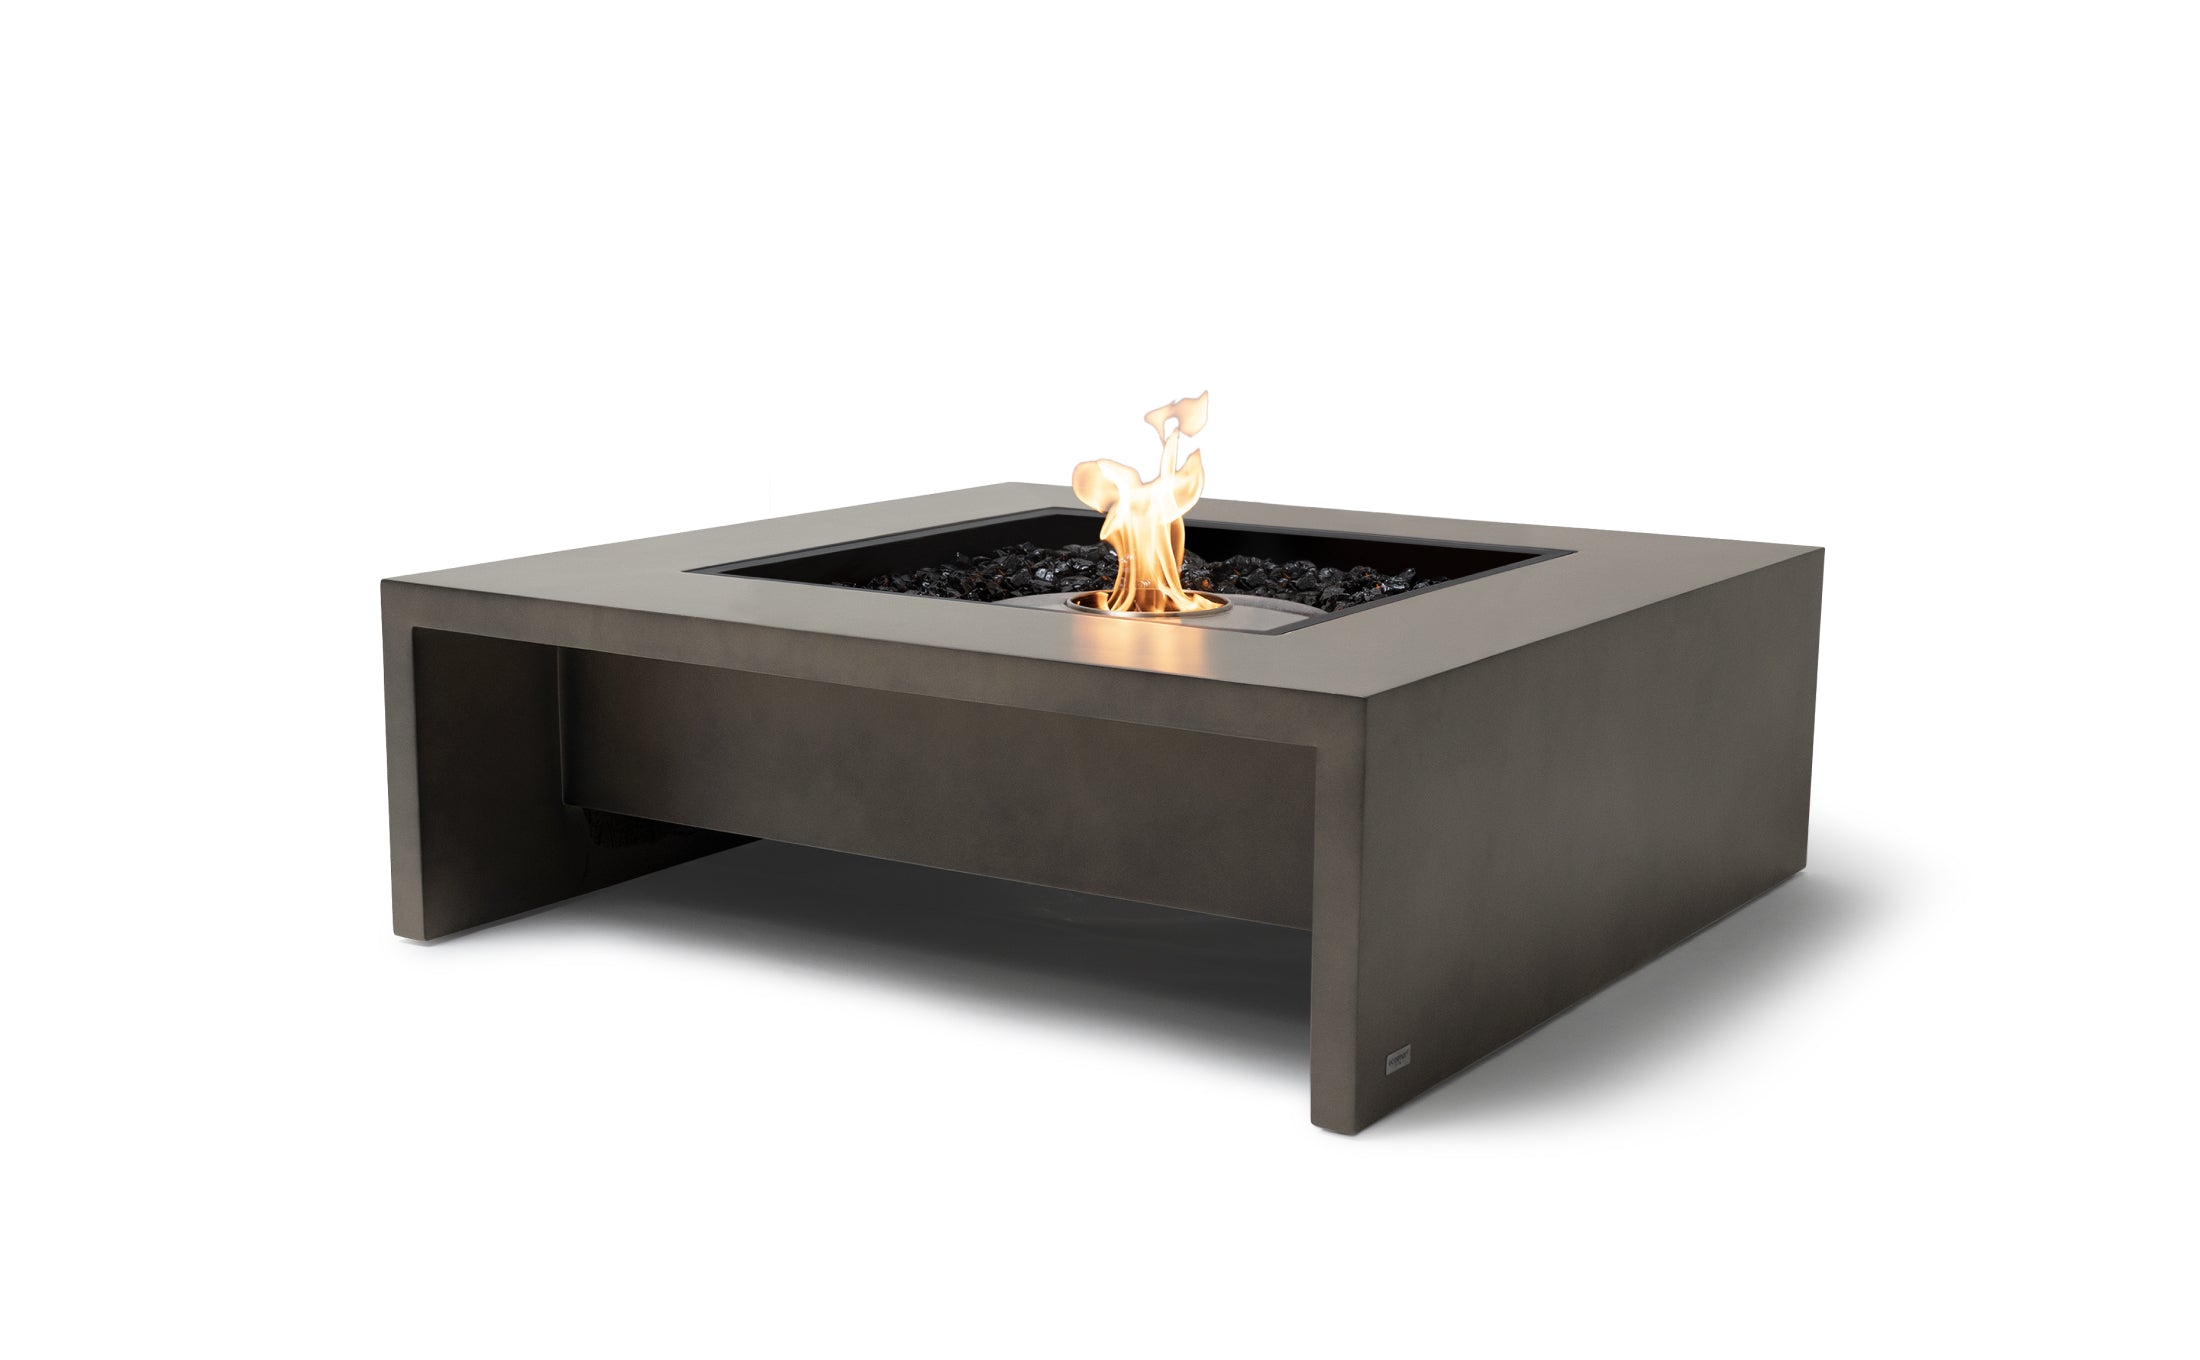 Outdoor Fire Tables